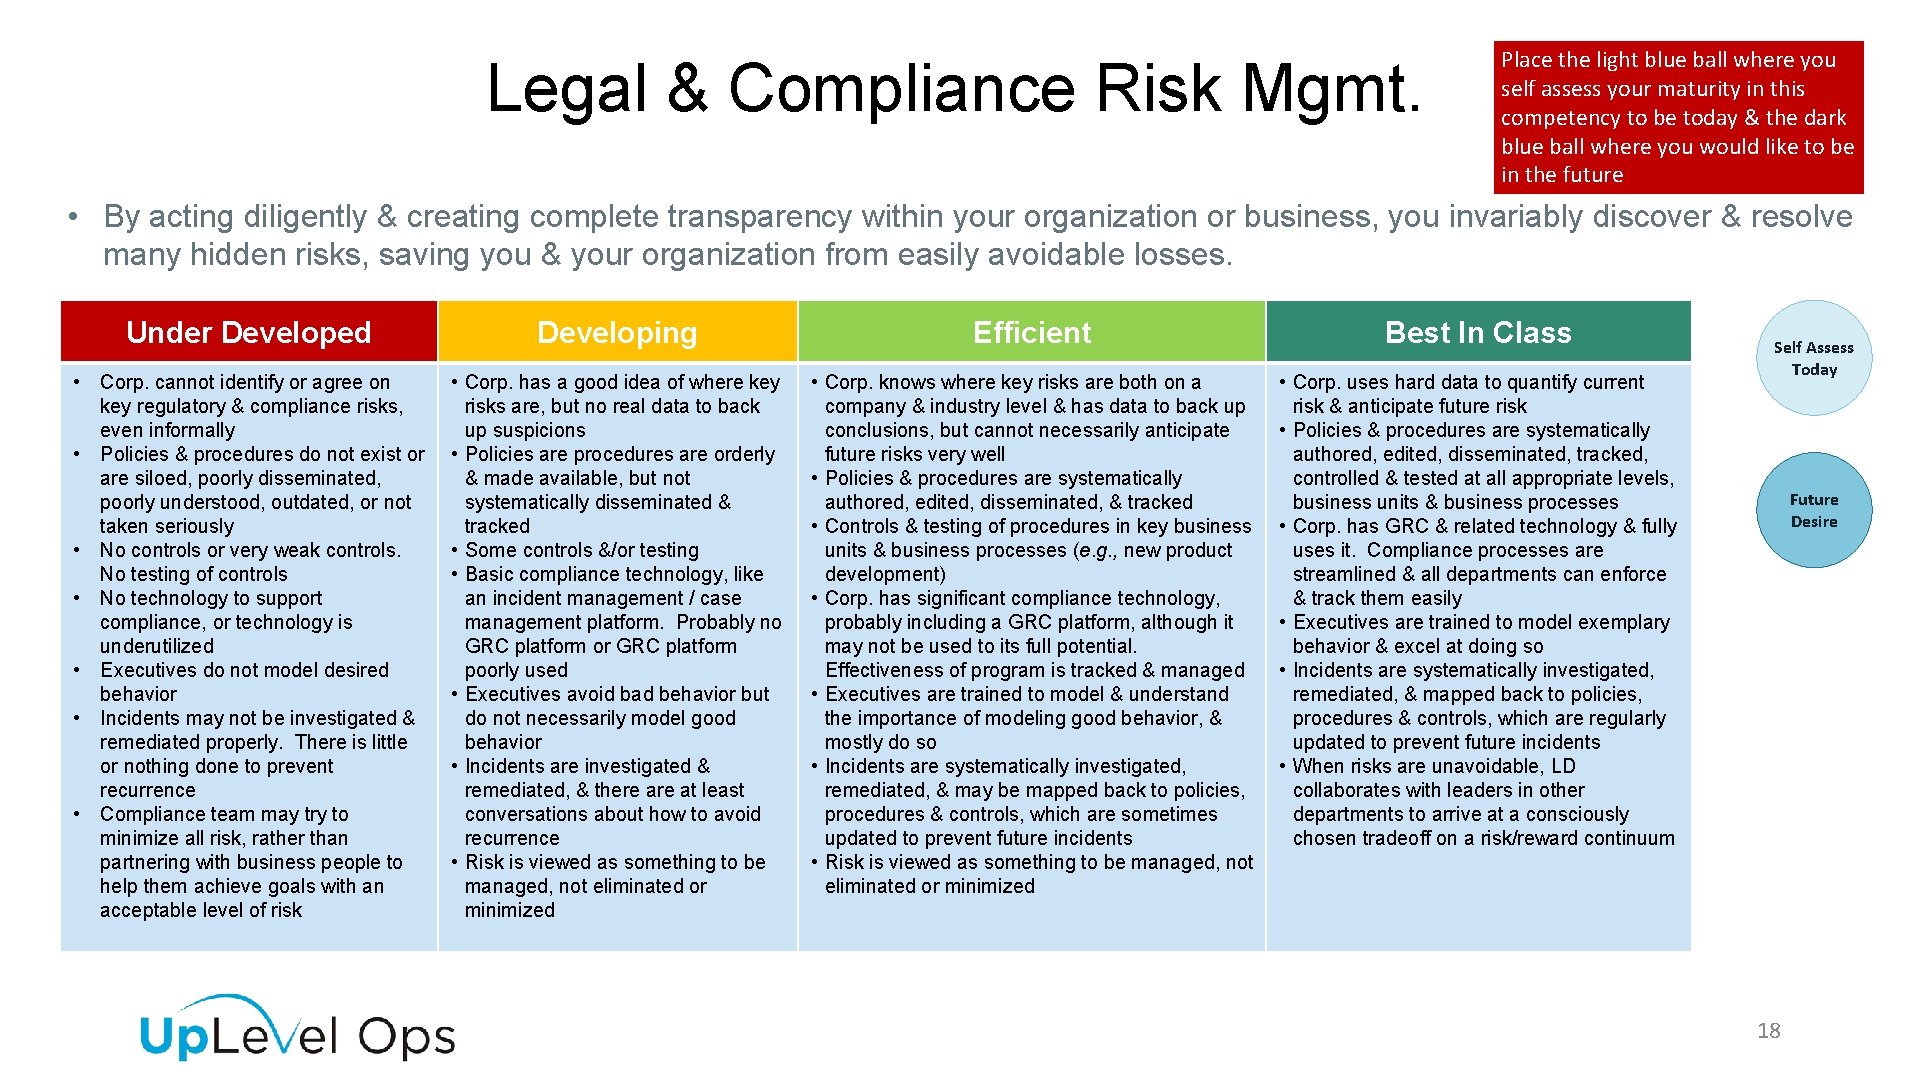 Legal & Compliance Risk Mgmt. Place the light blue ball where you self assess